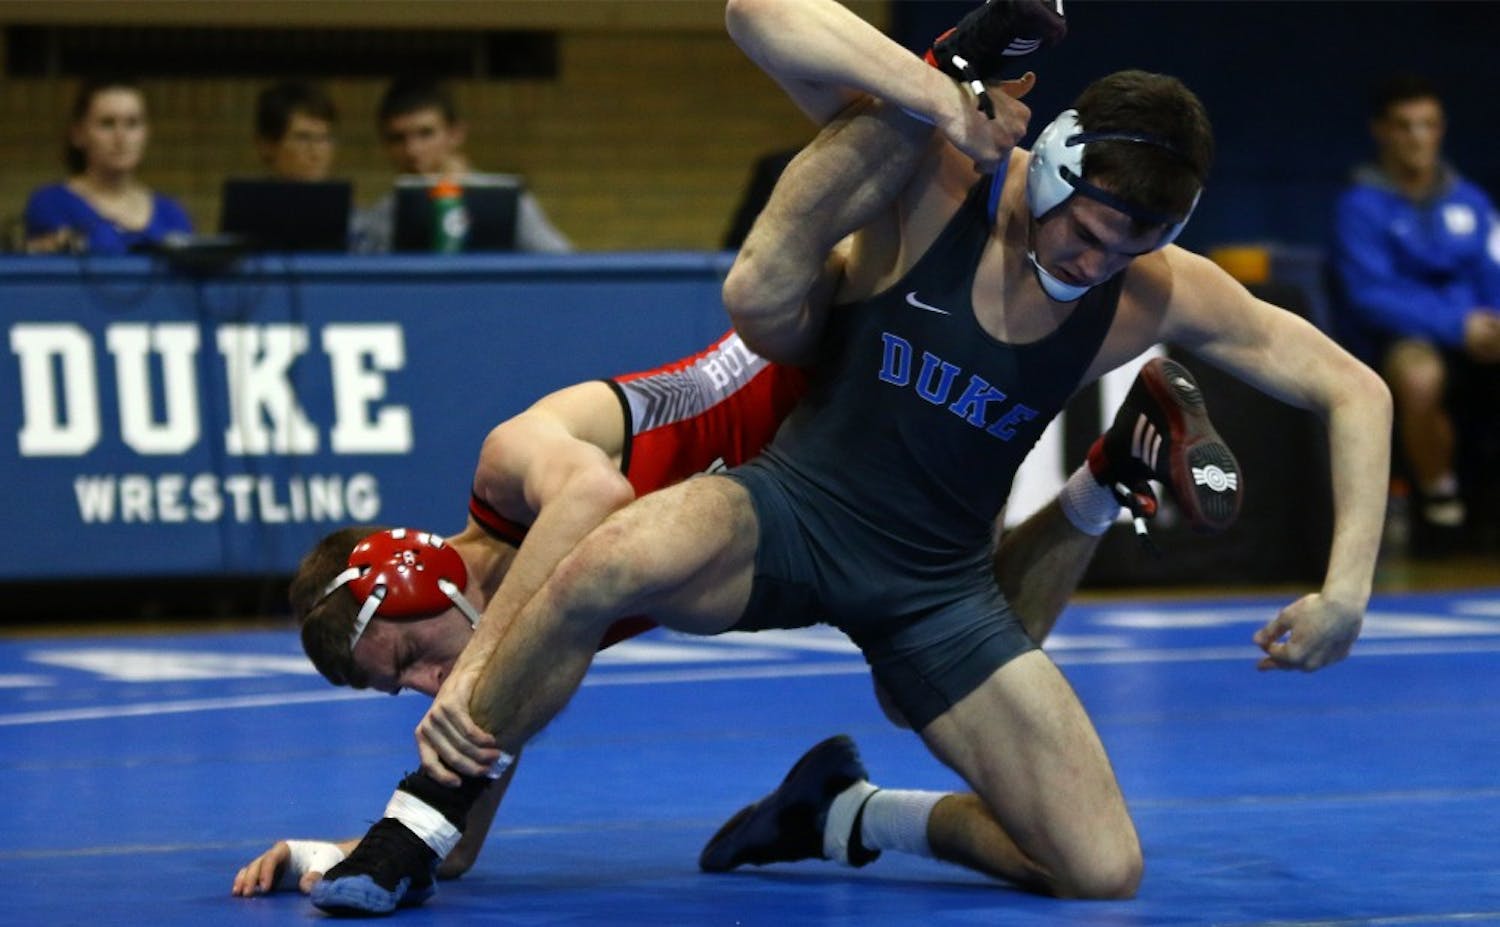 Mitch Finesilver took home the ACC title this weekend.